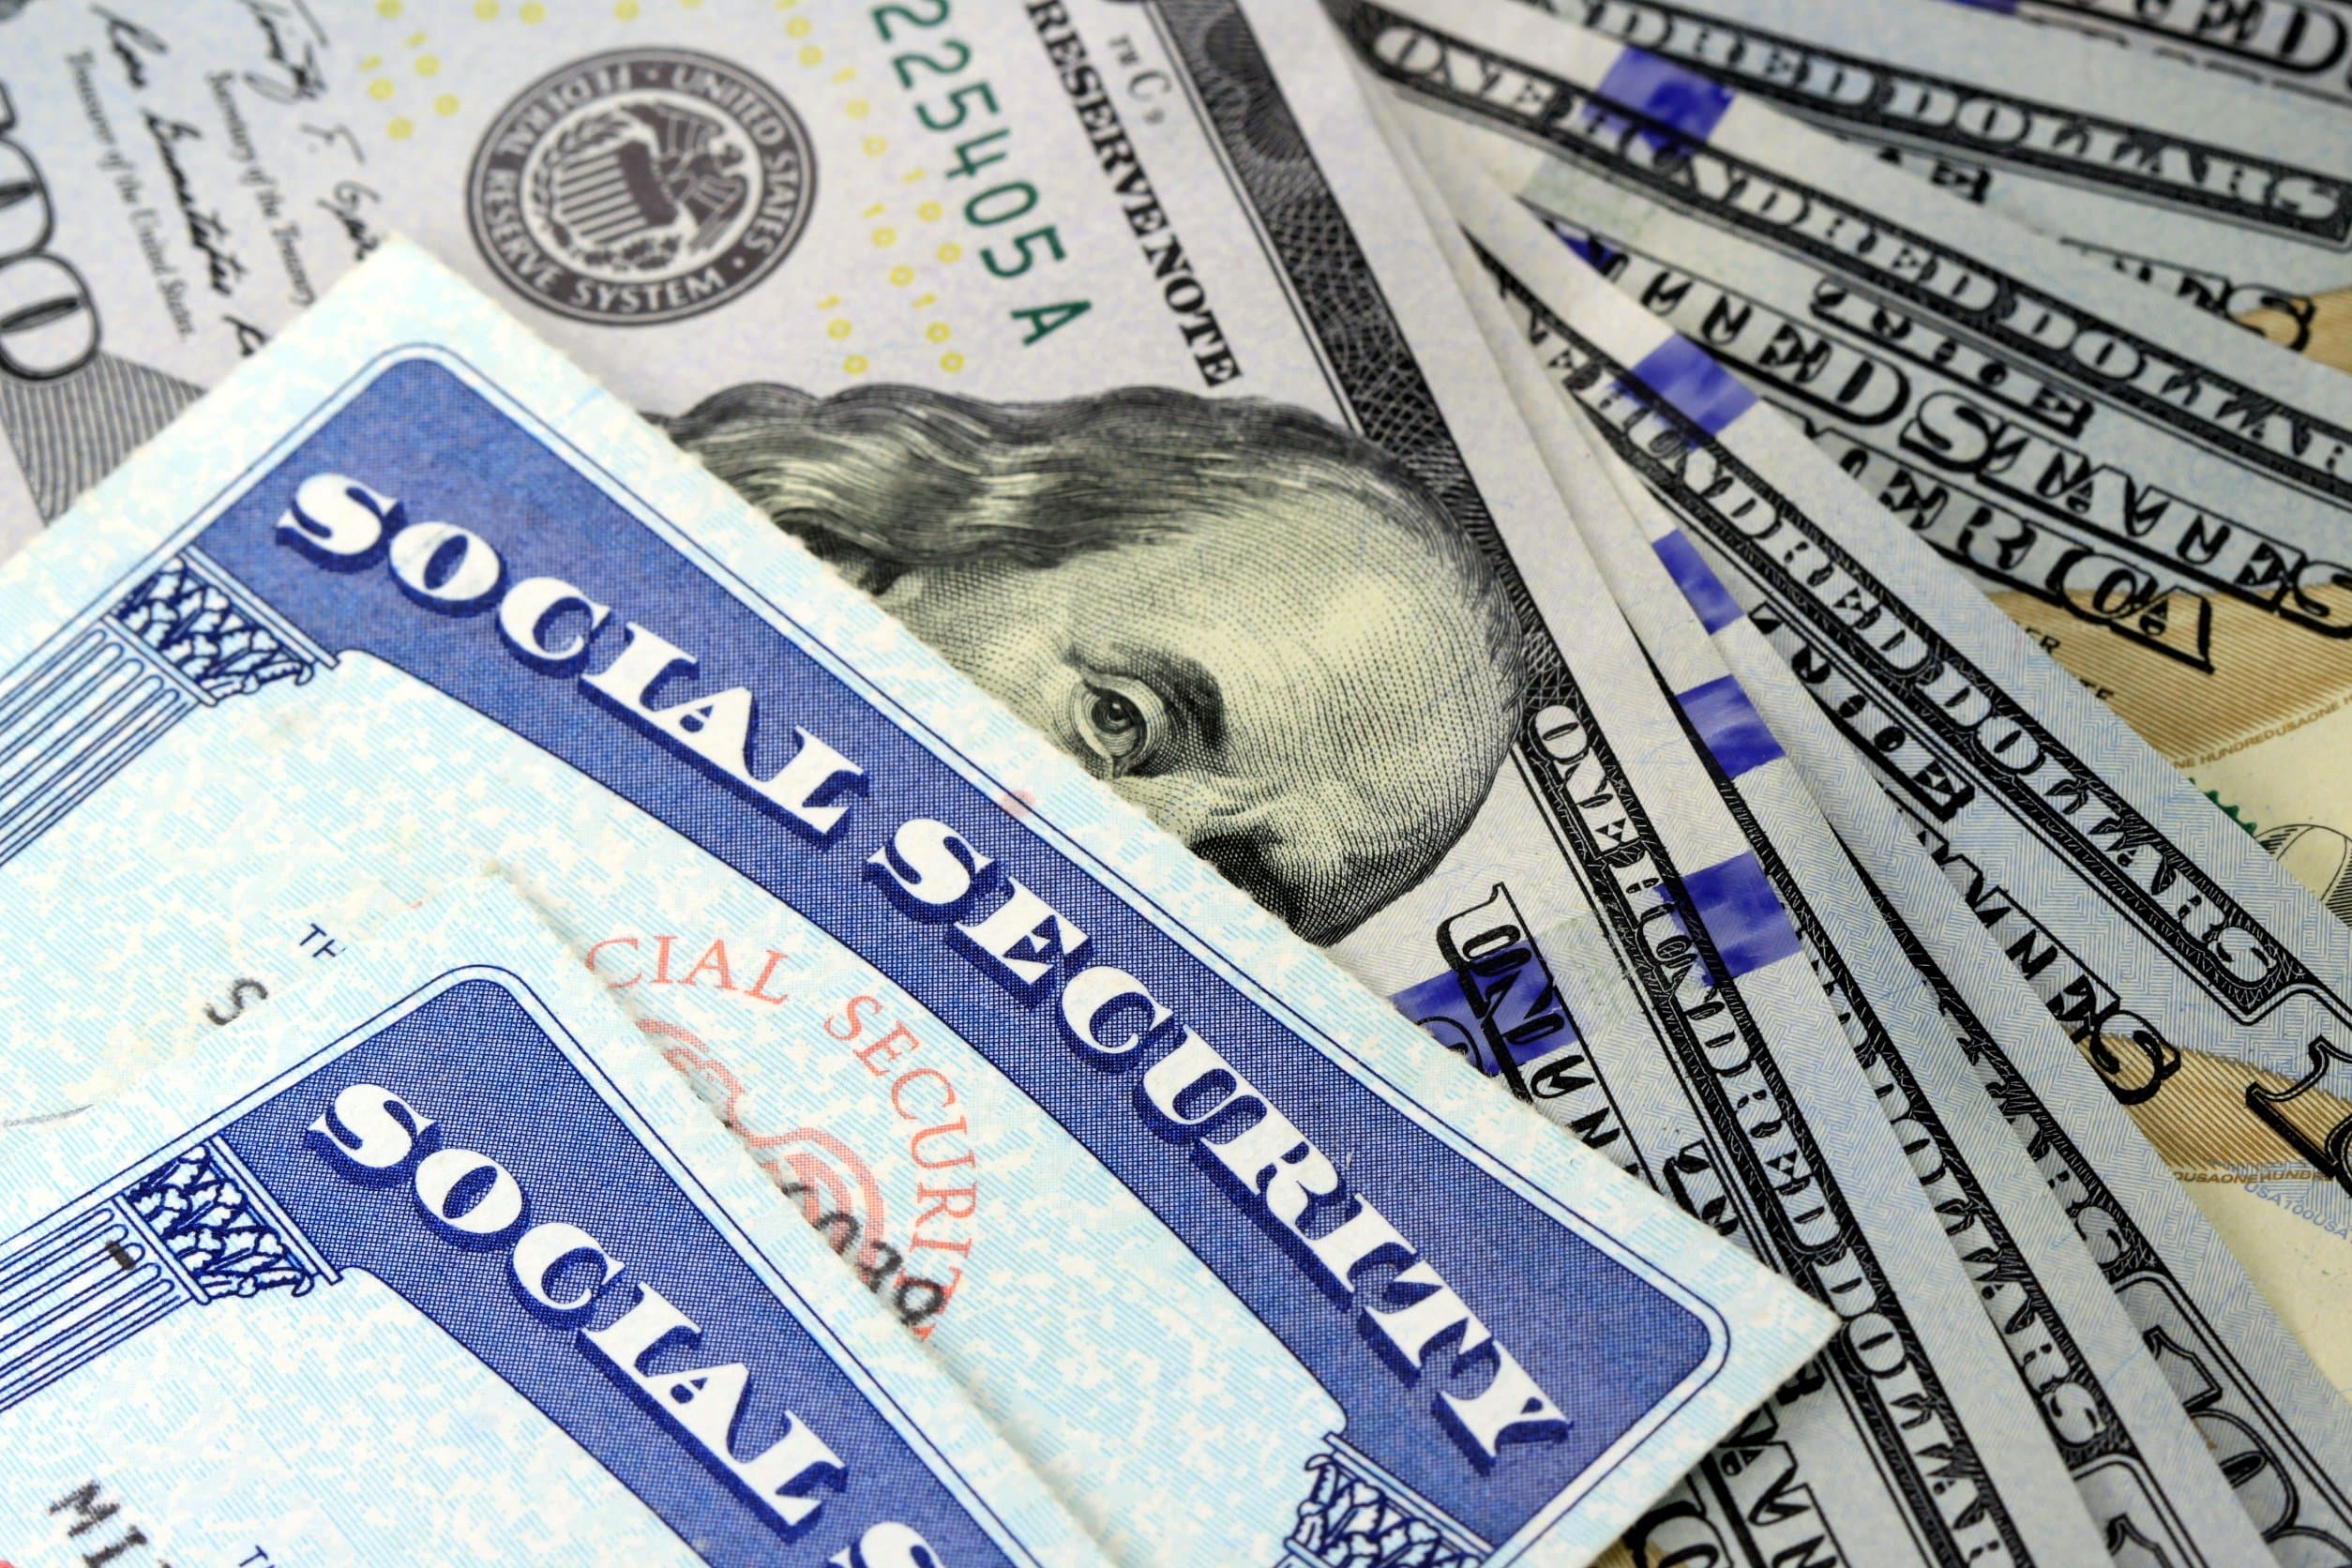 Social Security card and US currency (one hundred dollar bills)